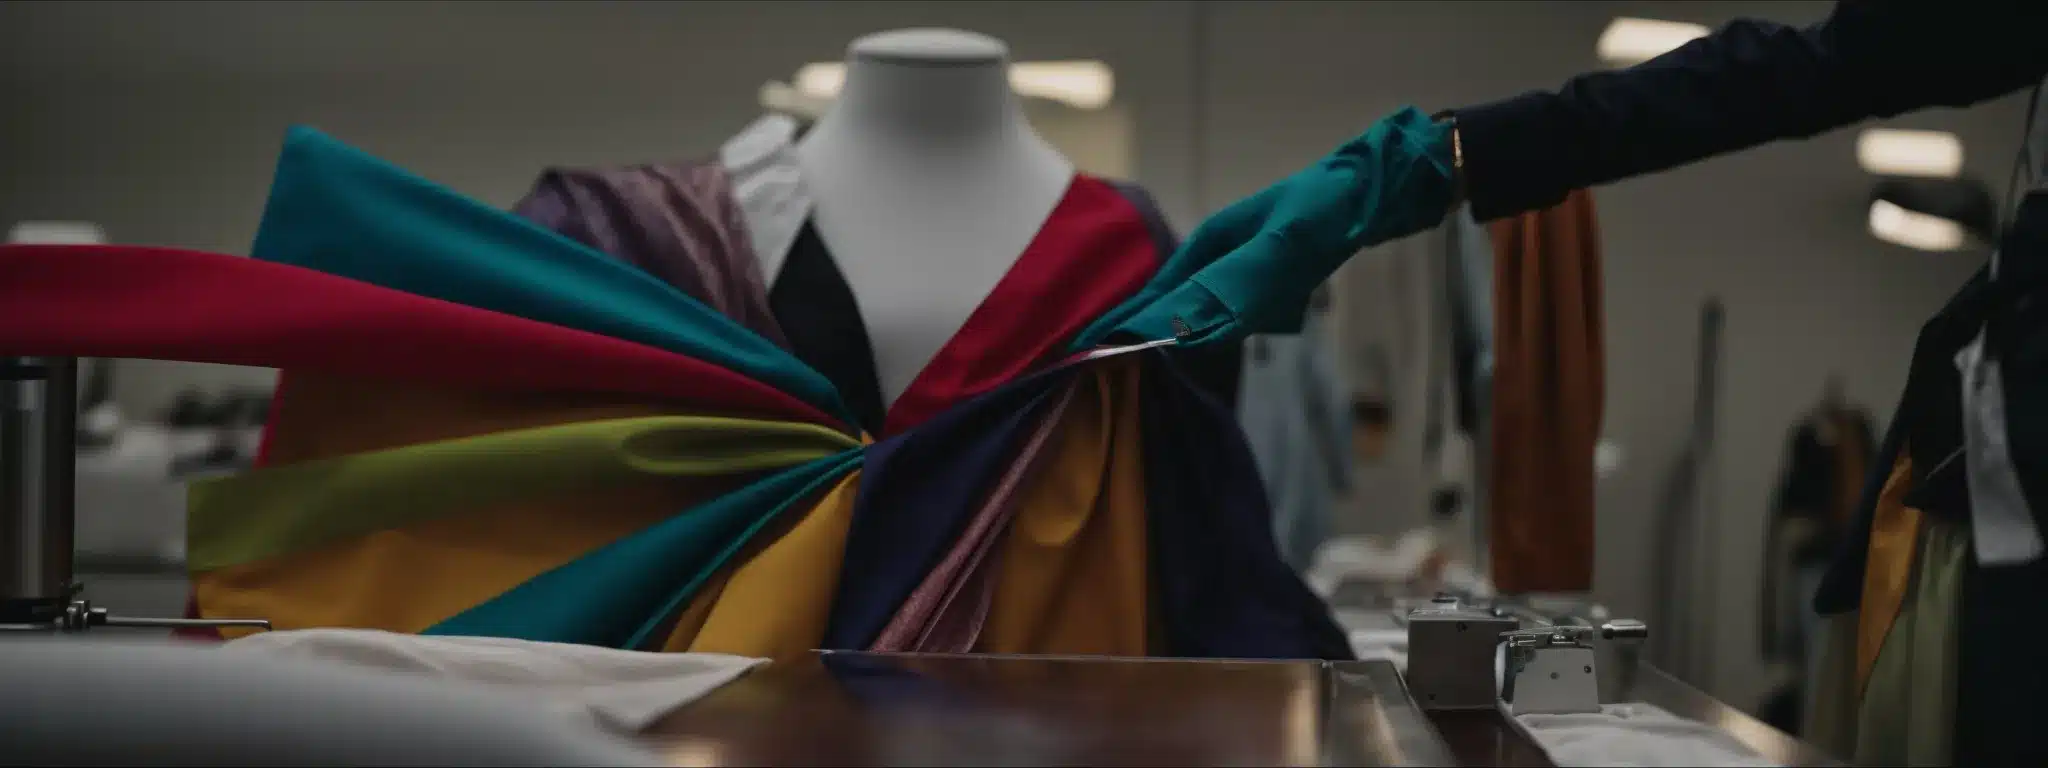 A Tailor Aligns Colorful Fabrics On A Mannequin, Illustrating The Precision Of A Custom Fit.